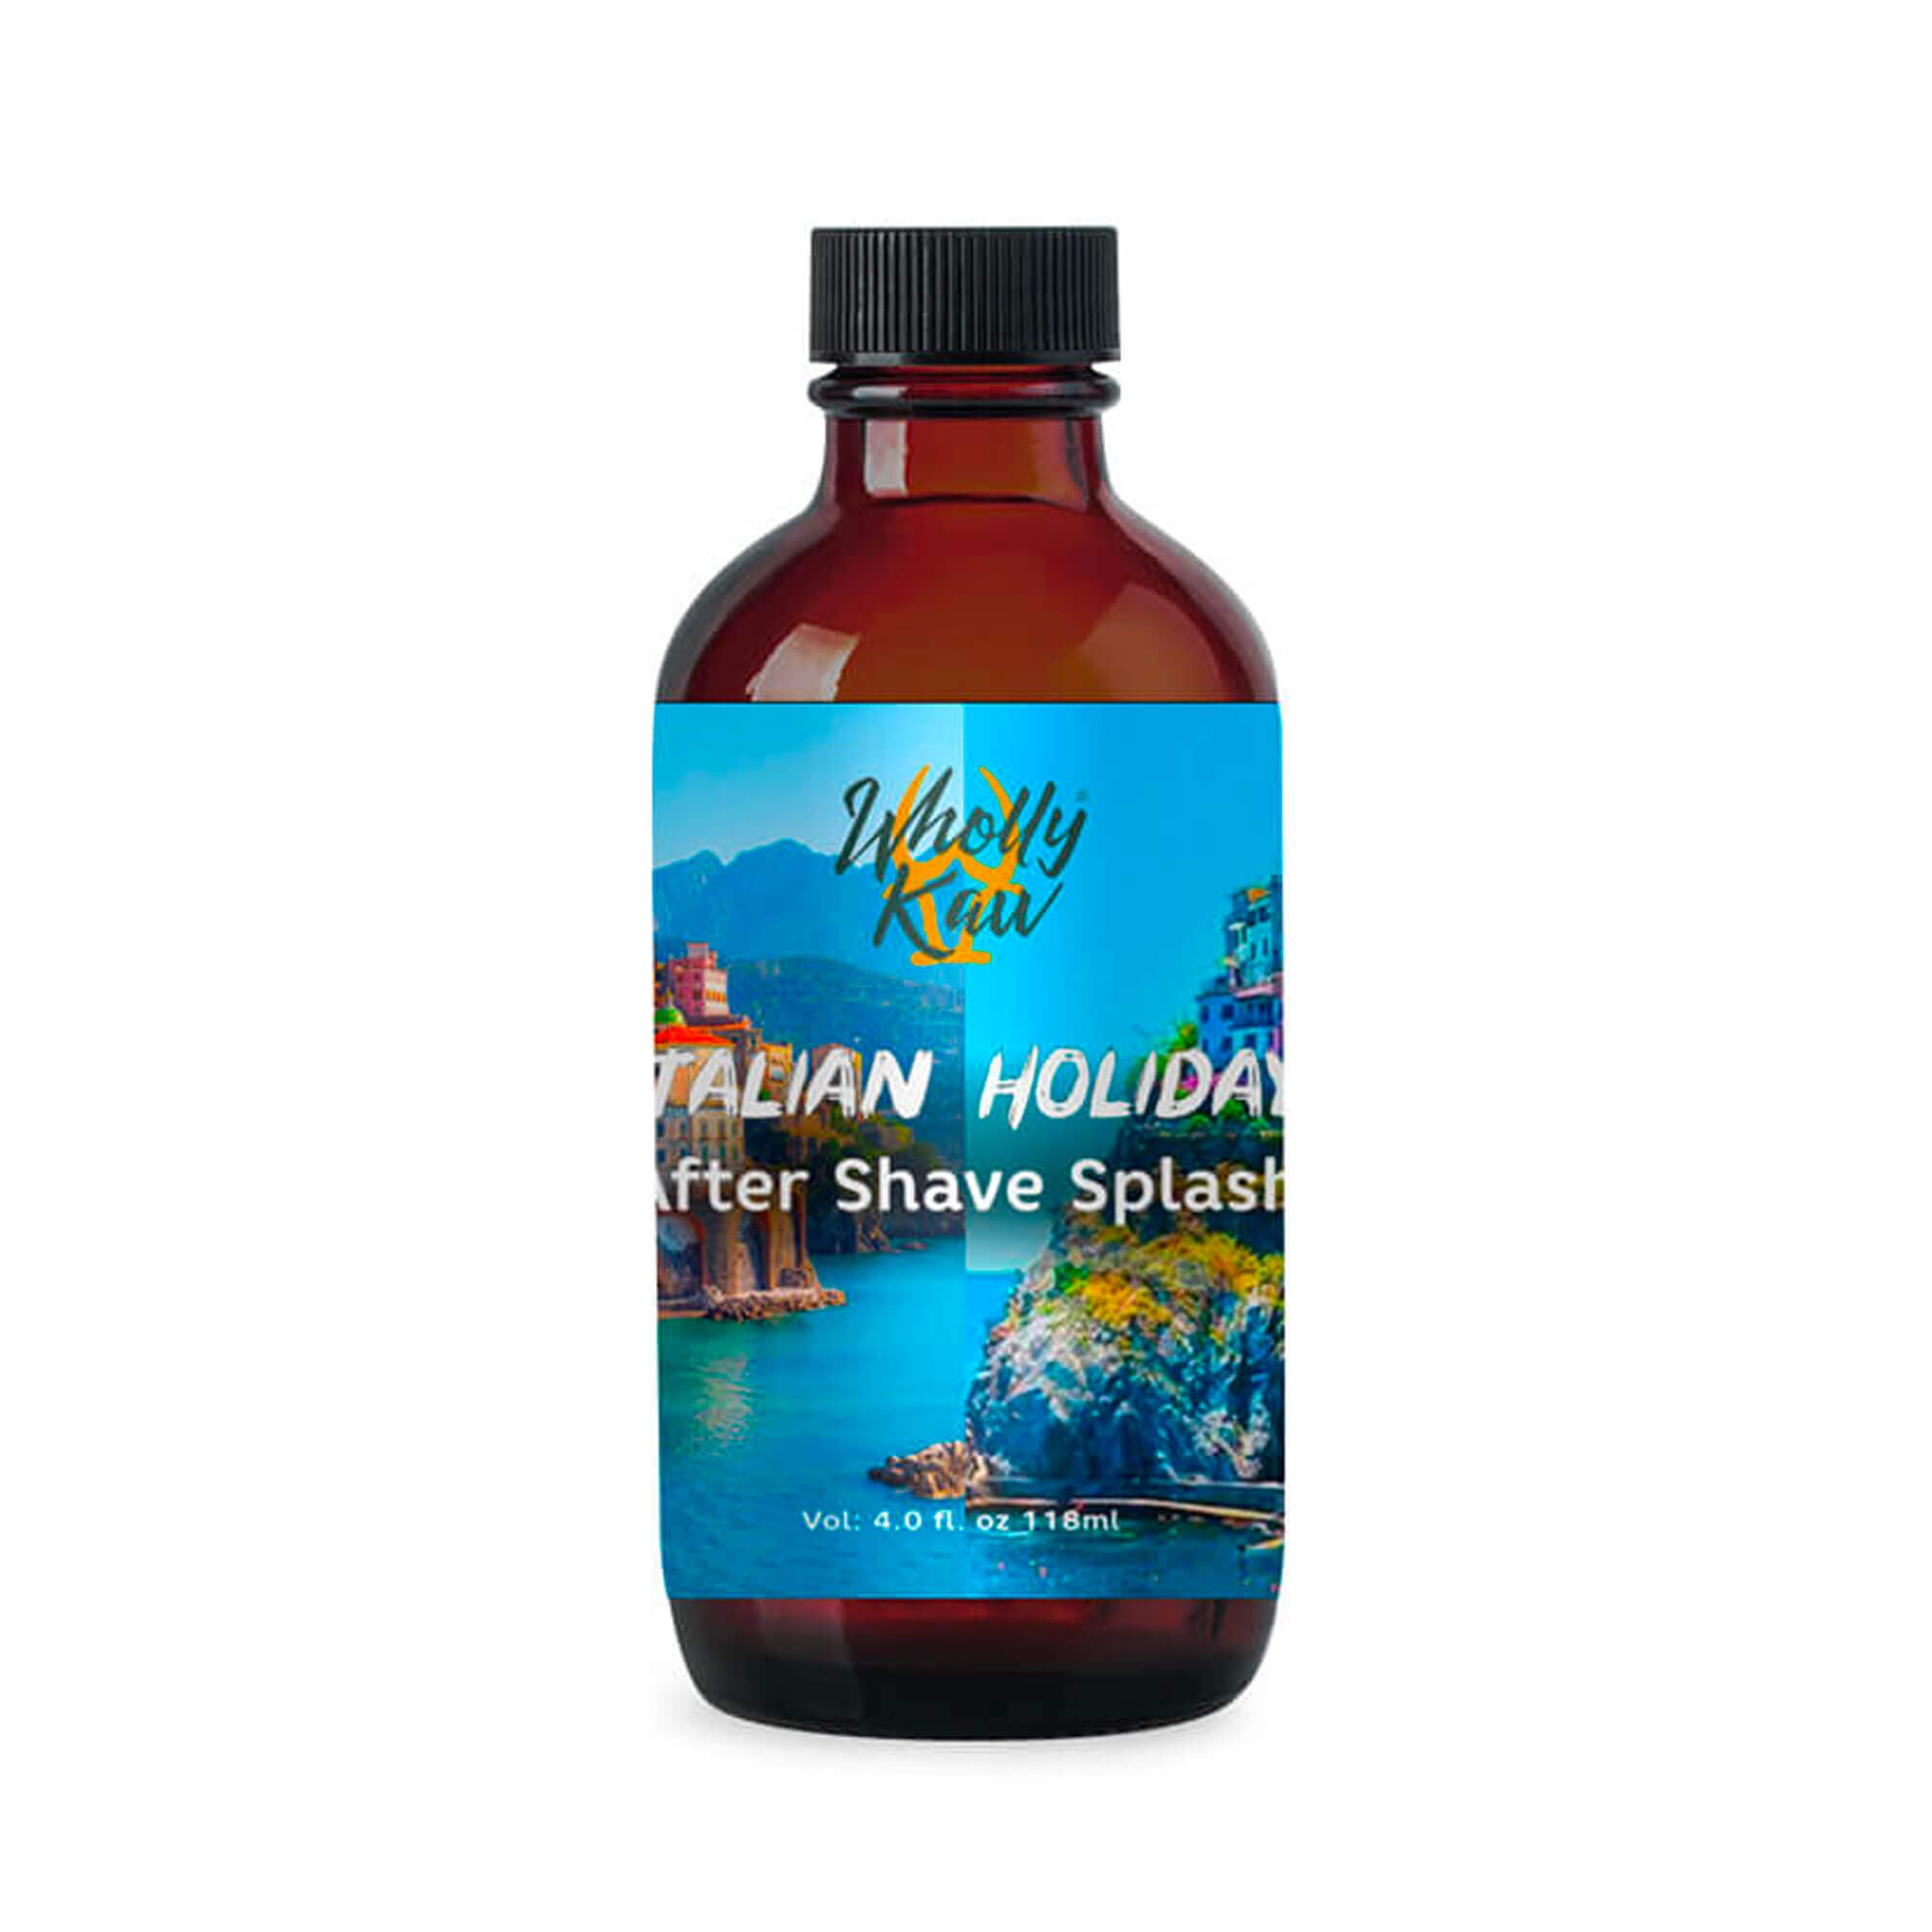 Wholly Kaw Italian Holiday Aftershave Splash